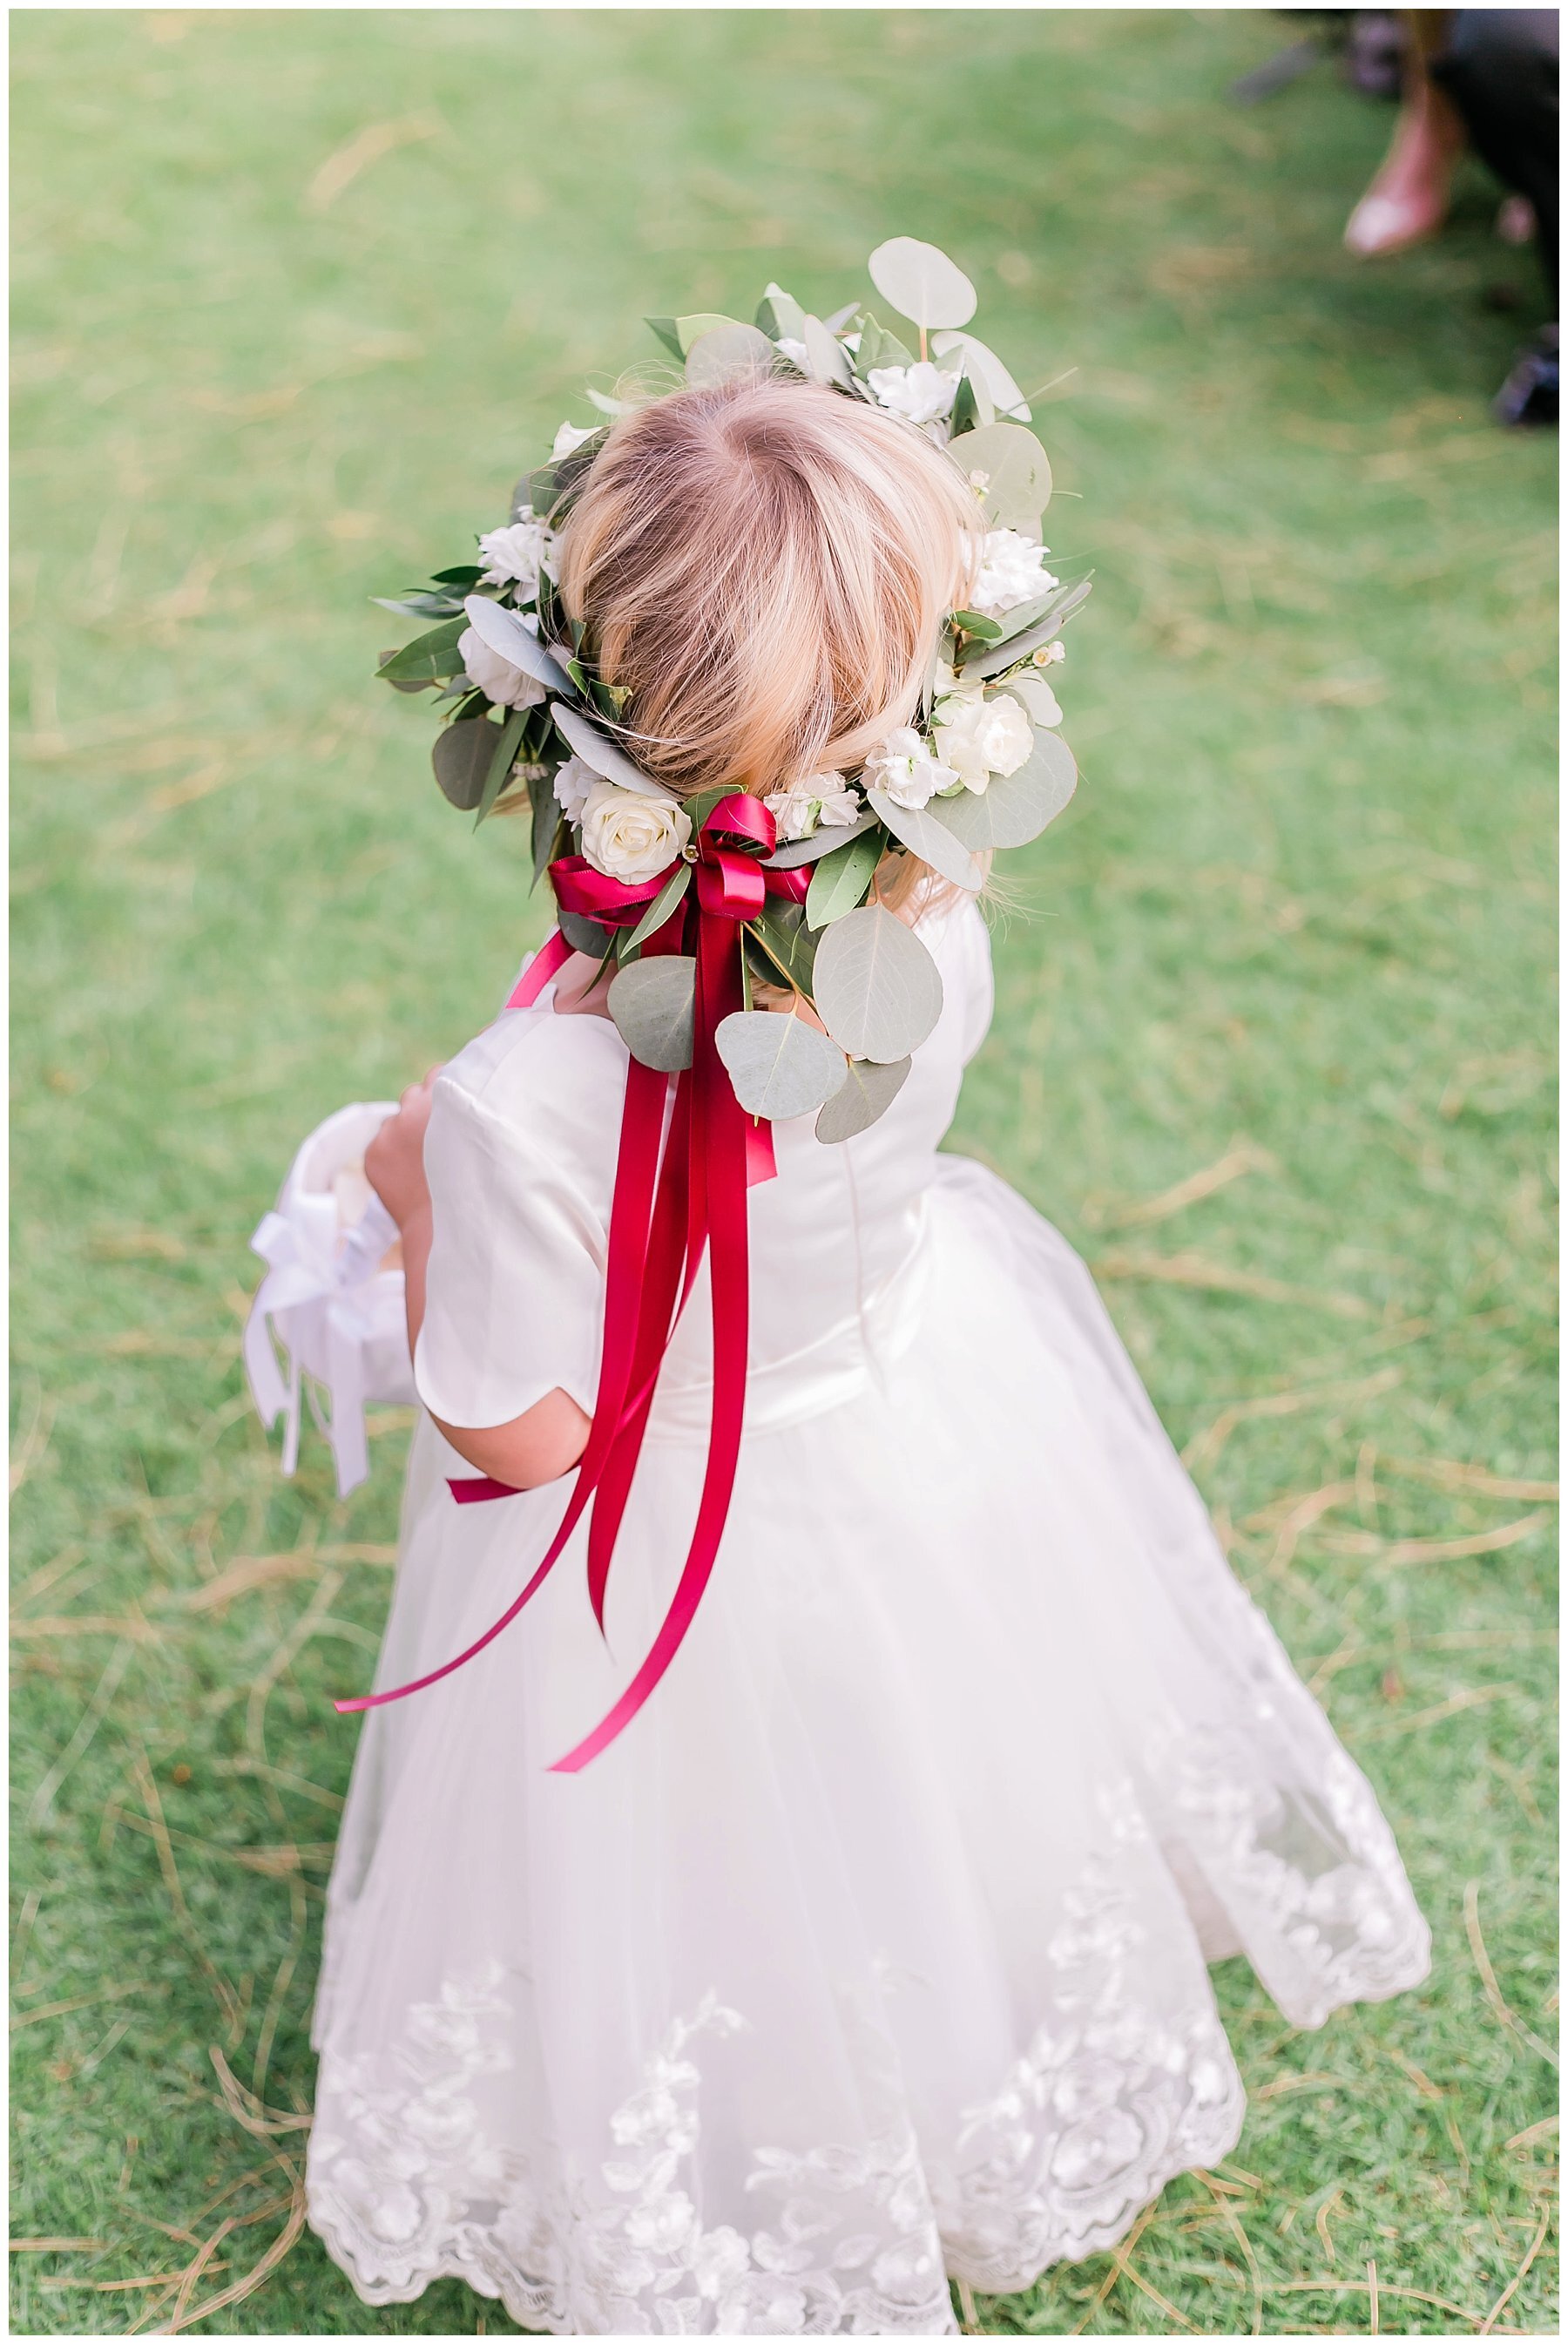  view of the flower girl’s crown from behind 